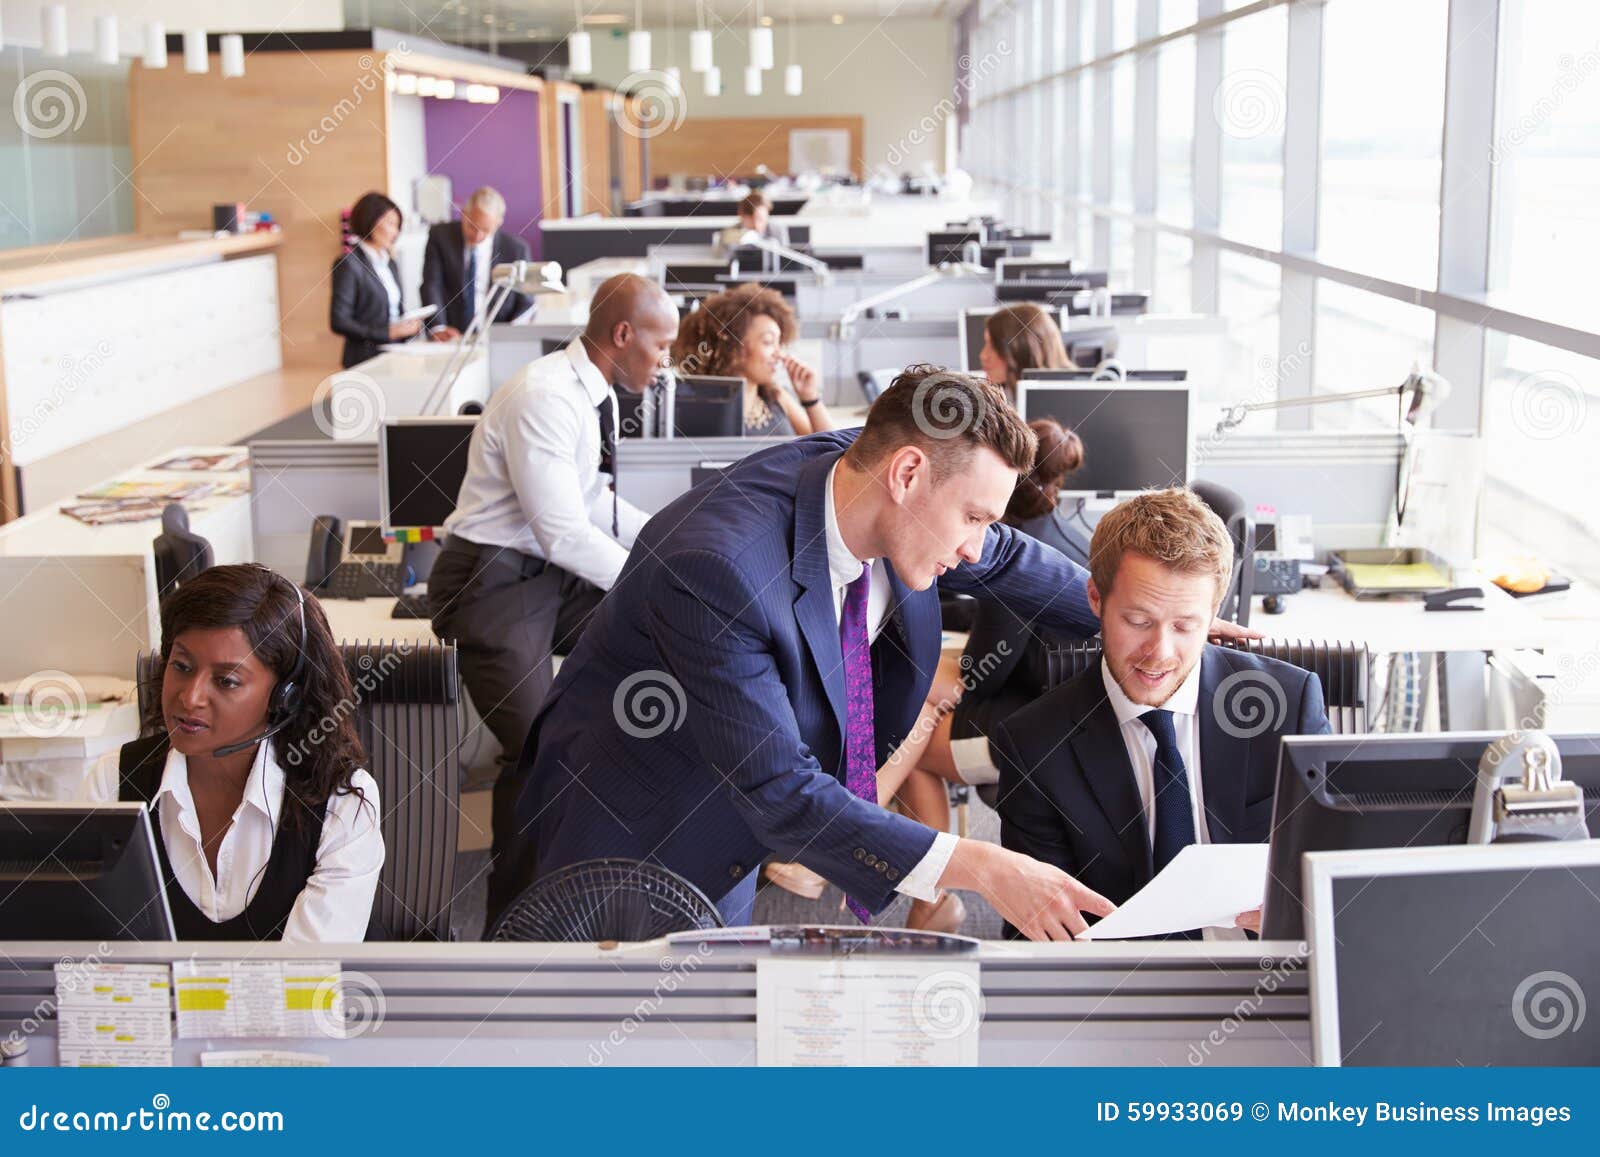 two businessmen discussing work in a busy, open plan office